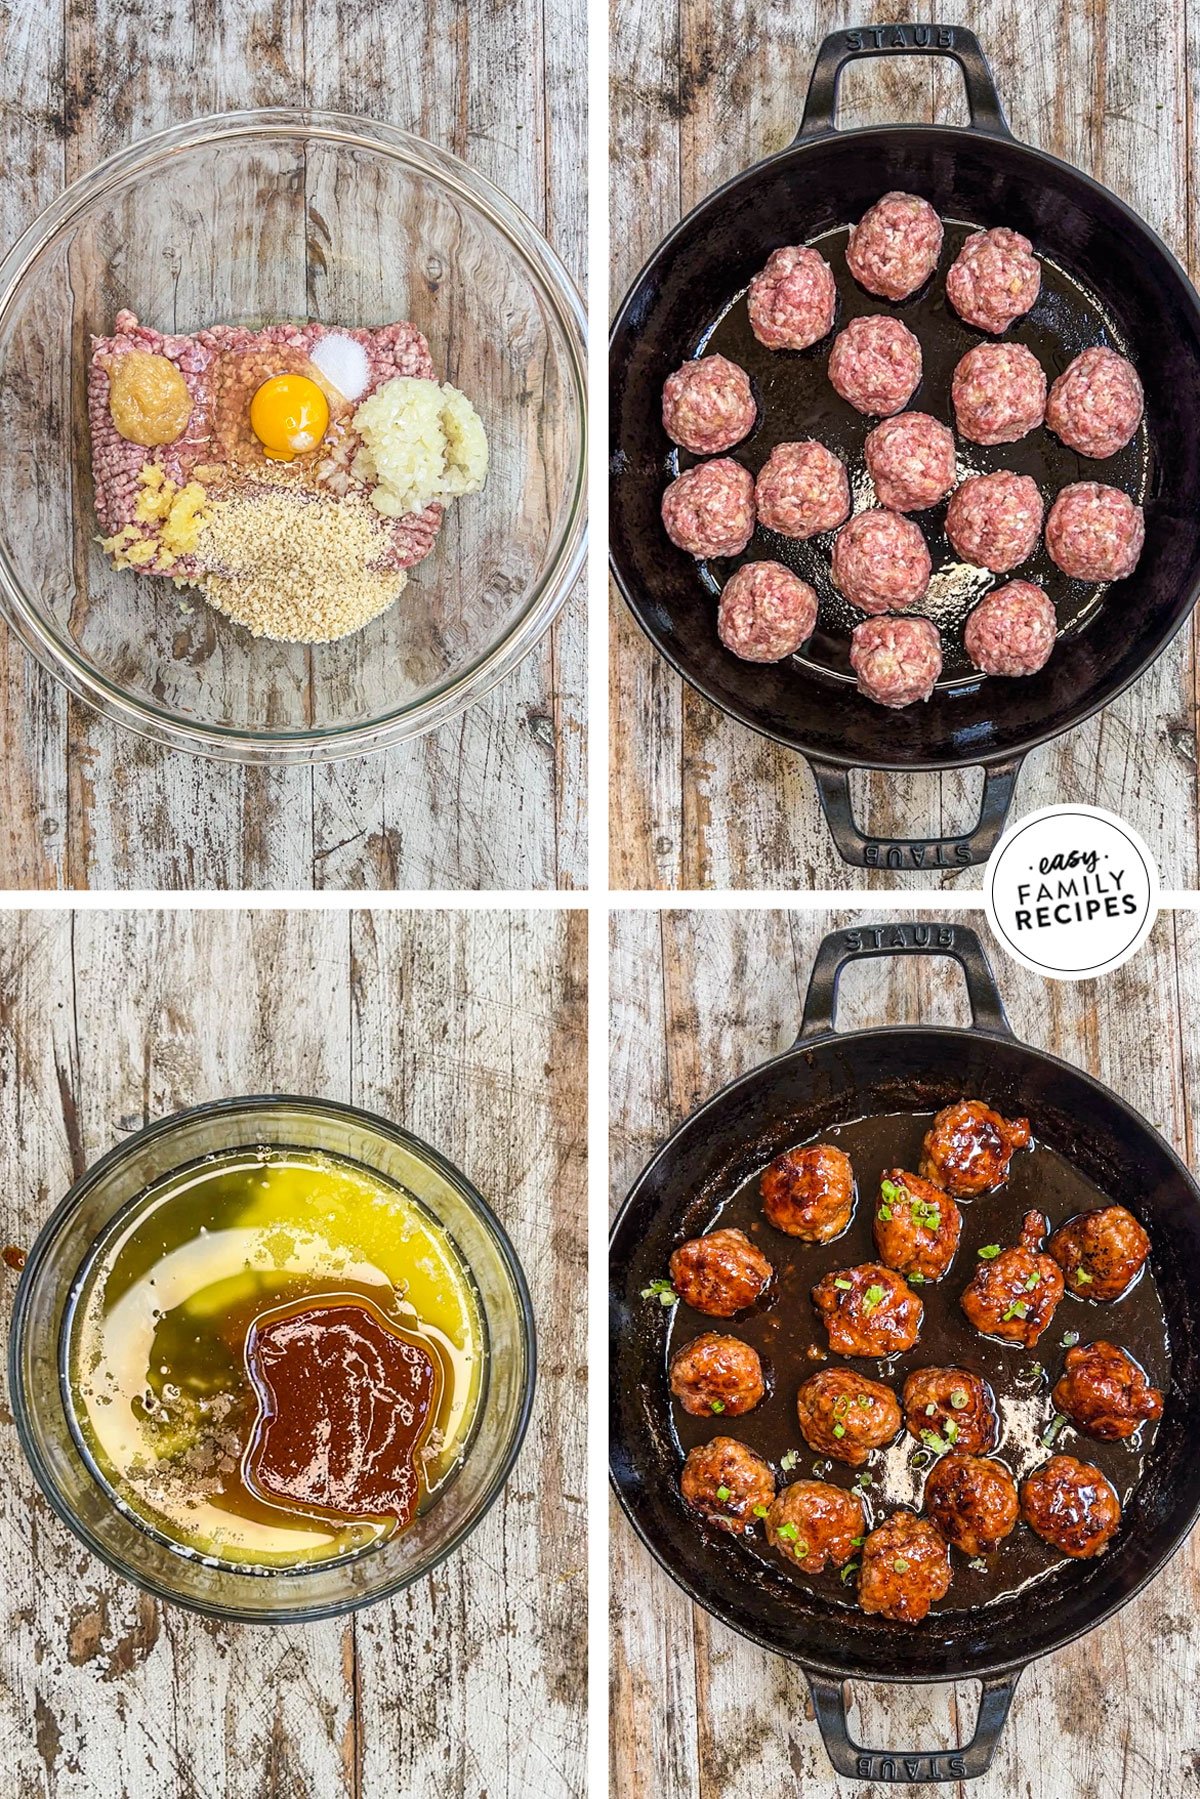 How to make honey sriracha meatballs: 1) Combine the meatball ingredients, 2) Sear the meatballs in a skillet, 3) Make the sauce, 4) Simmer the meatballs in the sauce